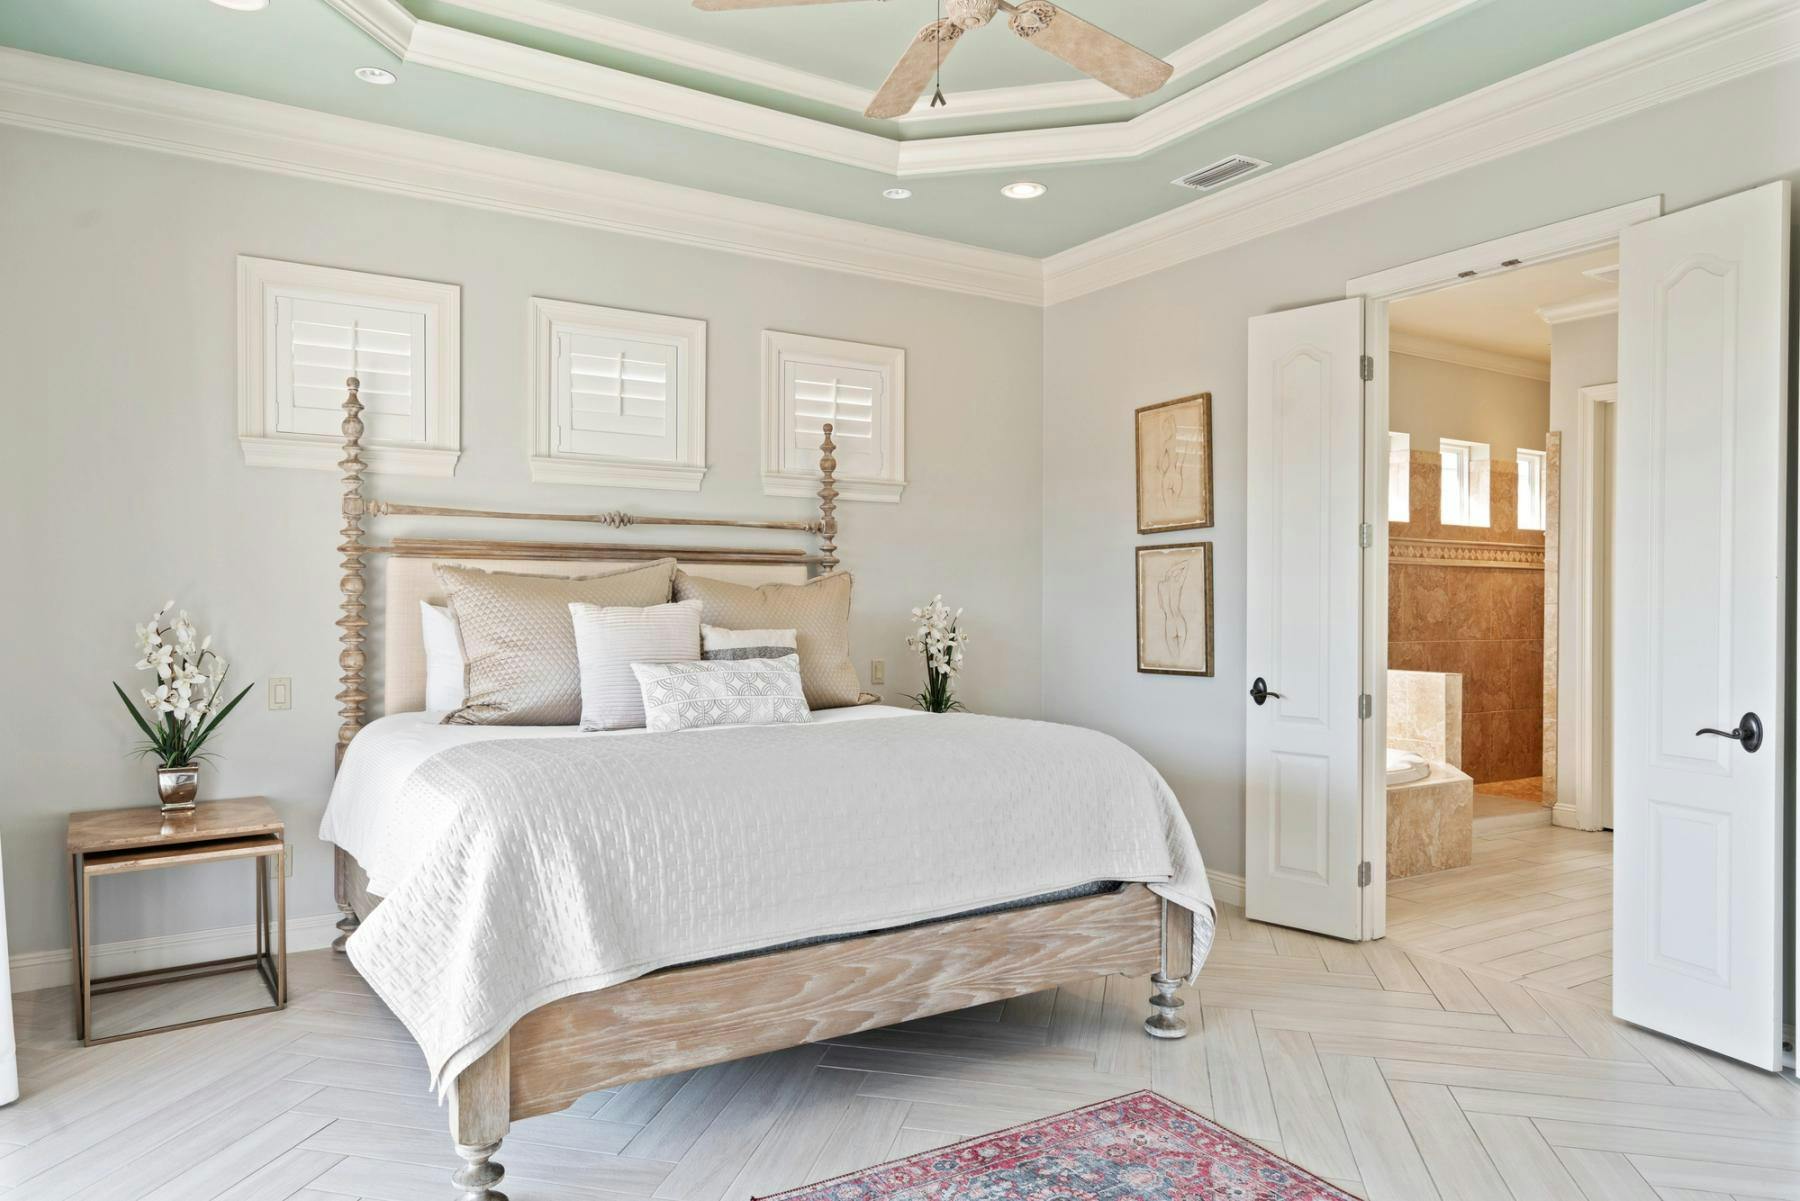 Coastal chic bedroom in a vacation rental managed by Scenic Stays.